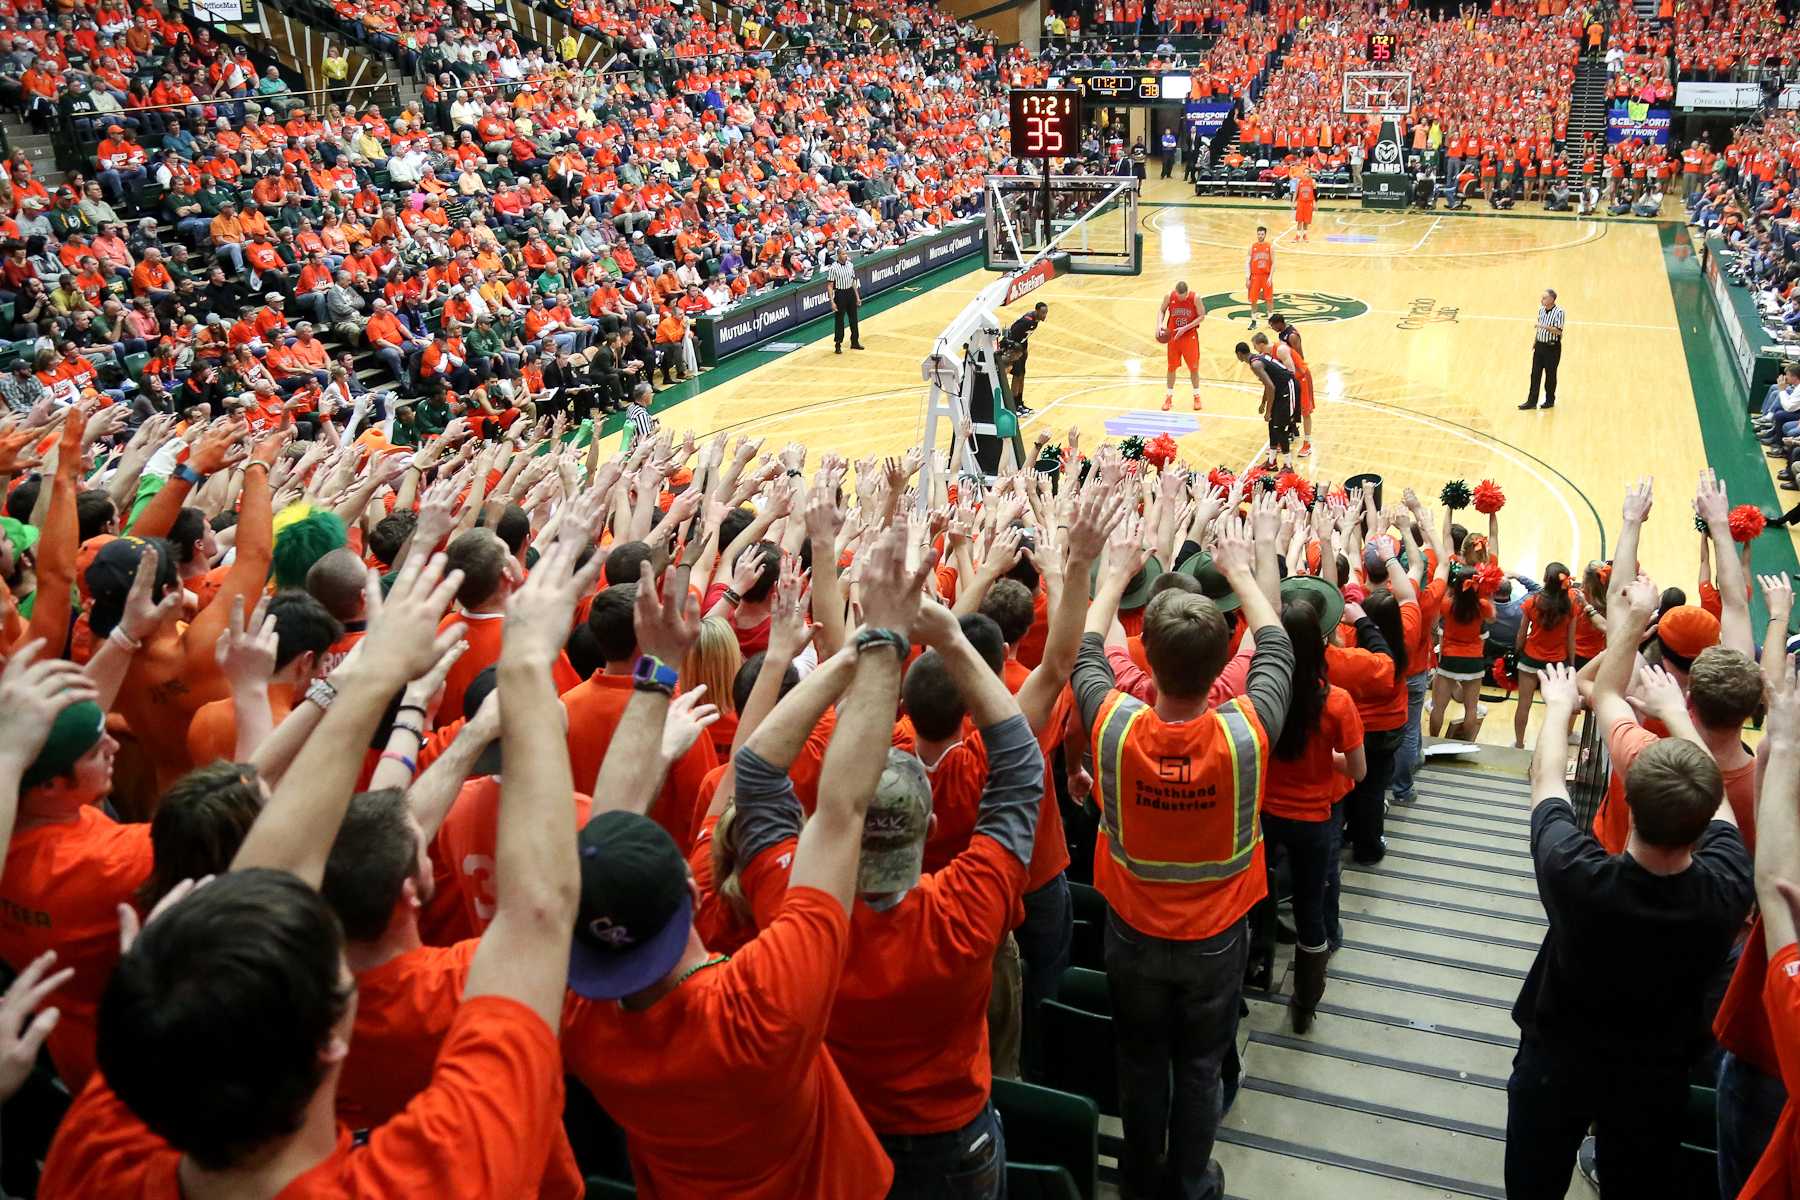 Moby Arena fans raise their hands as CSU center Colton Iverson shoots free throws Feb. 23 against San Diego State. The Rams are looking to extend their 27-game home winning streak Saturdy against No. 16 New Mexico.